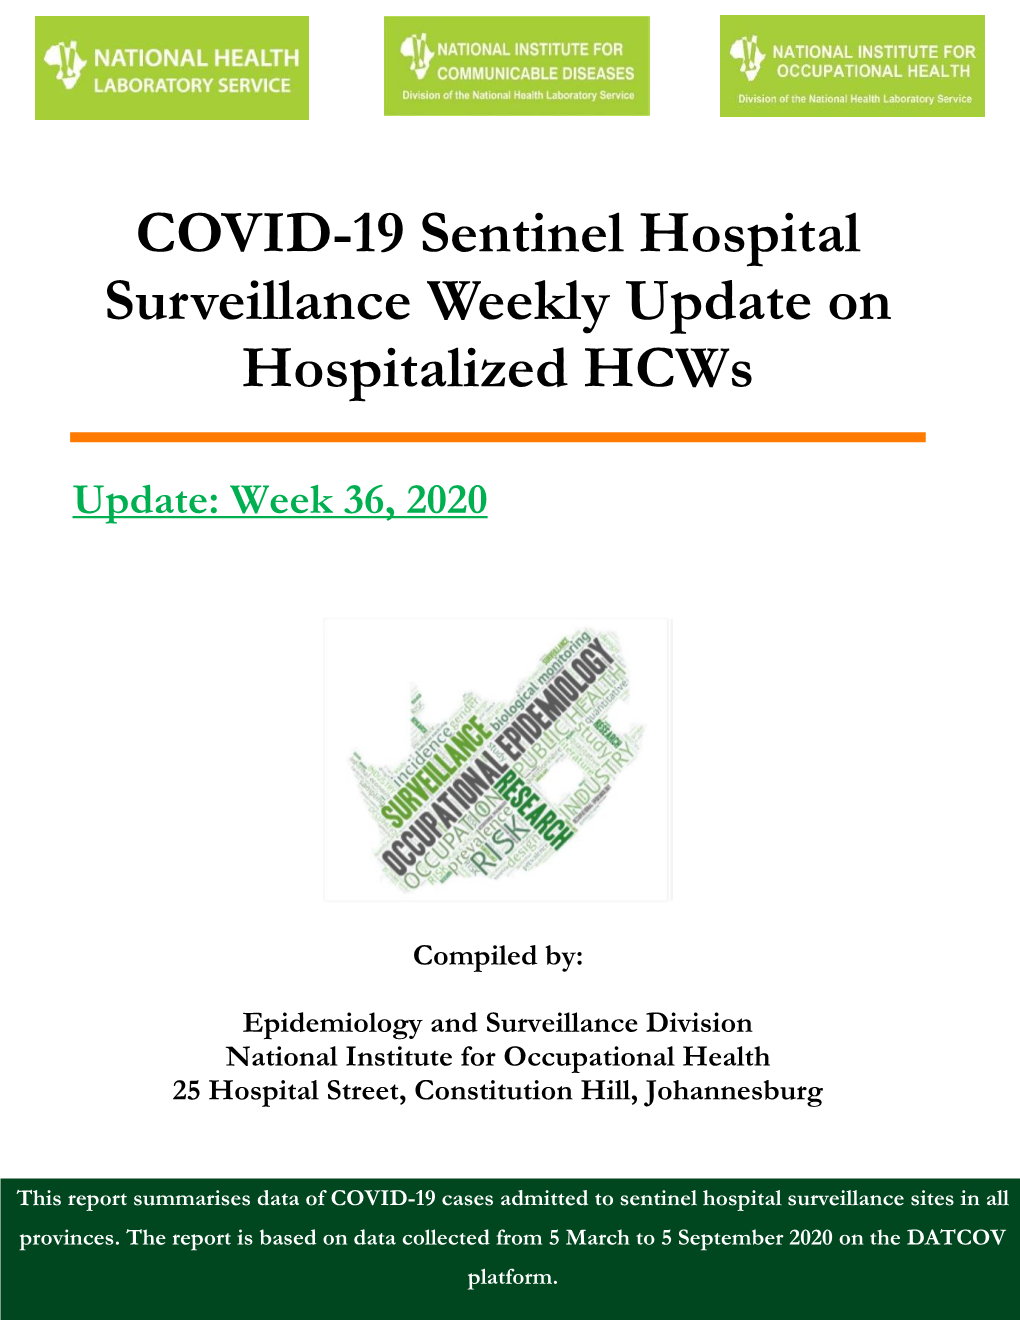 COVID-19 Sentinel Hospital Surveillance Weekly Update on Hospitalized Hcws